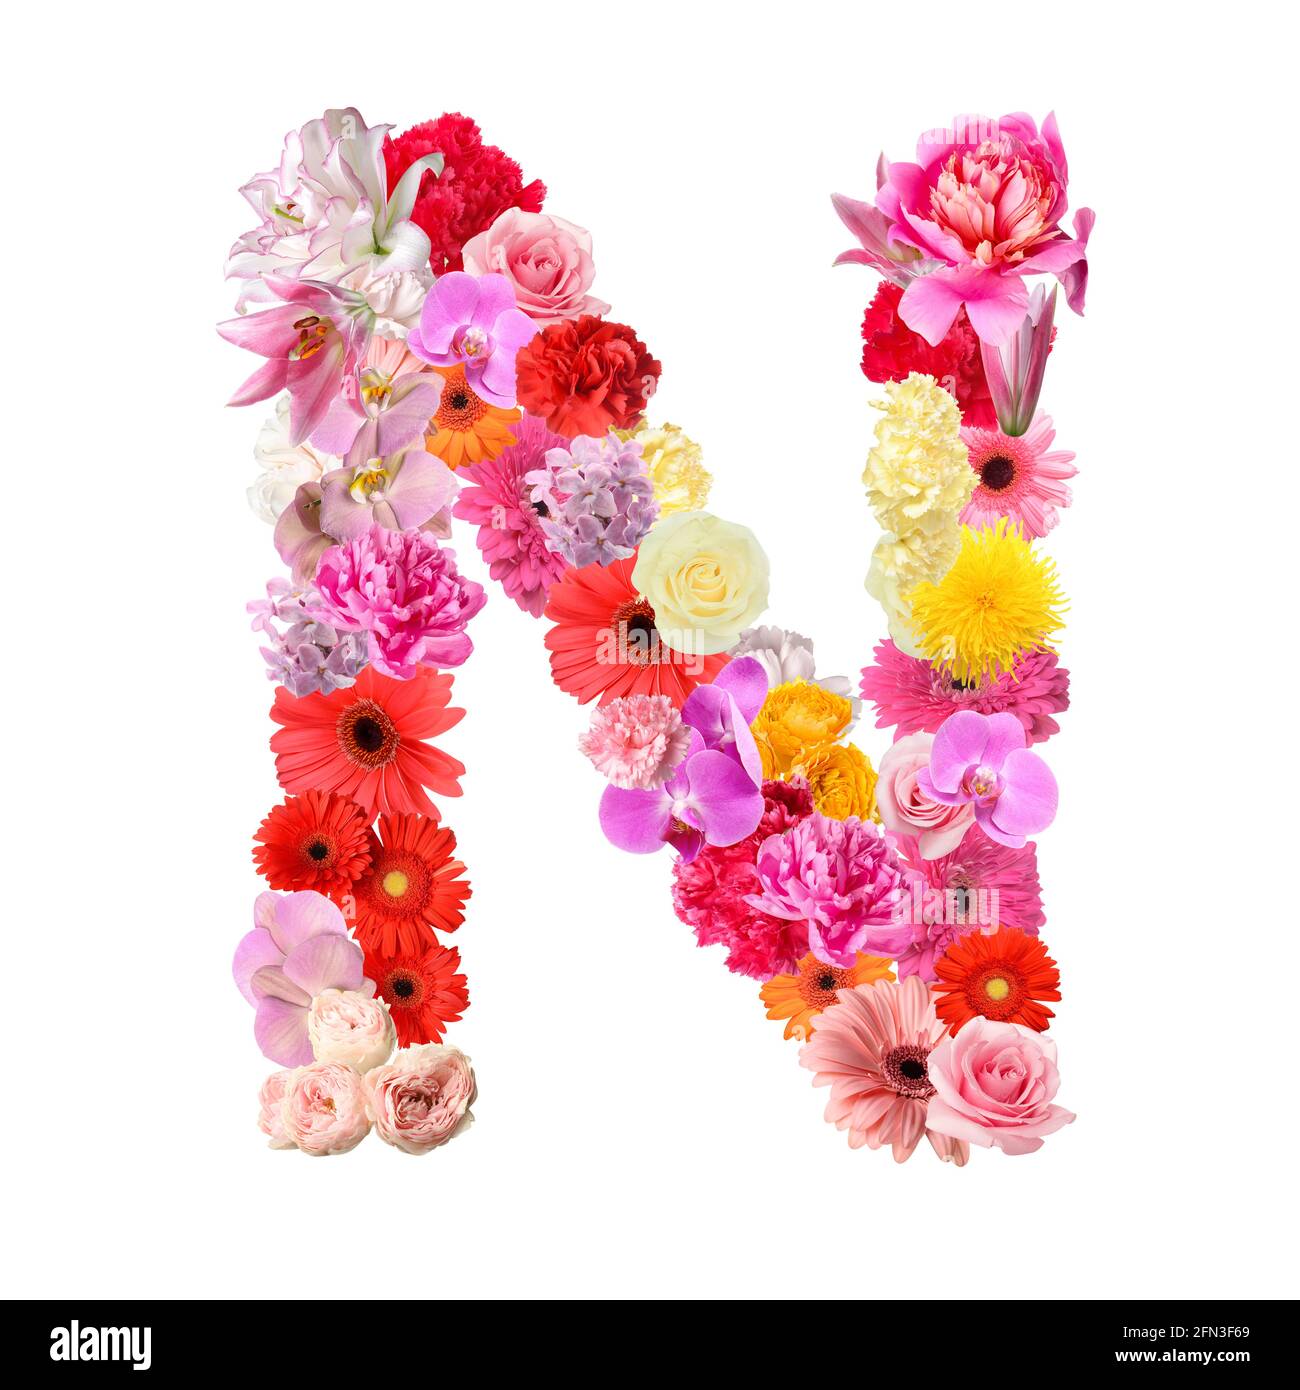 Letter N made of beautiful flowers on white background Stock Photo ...